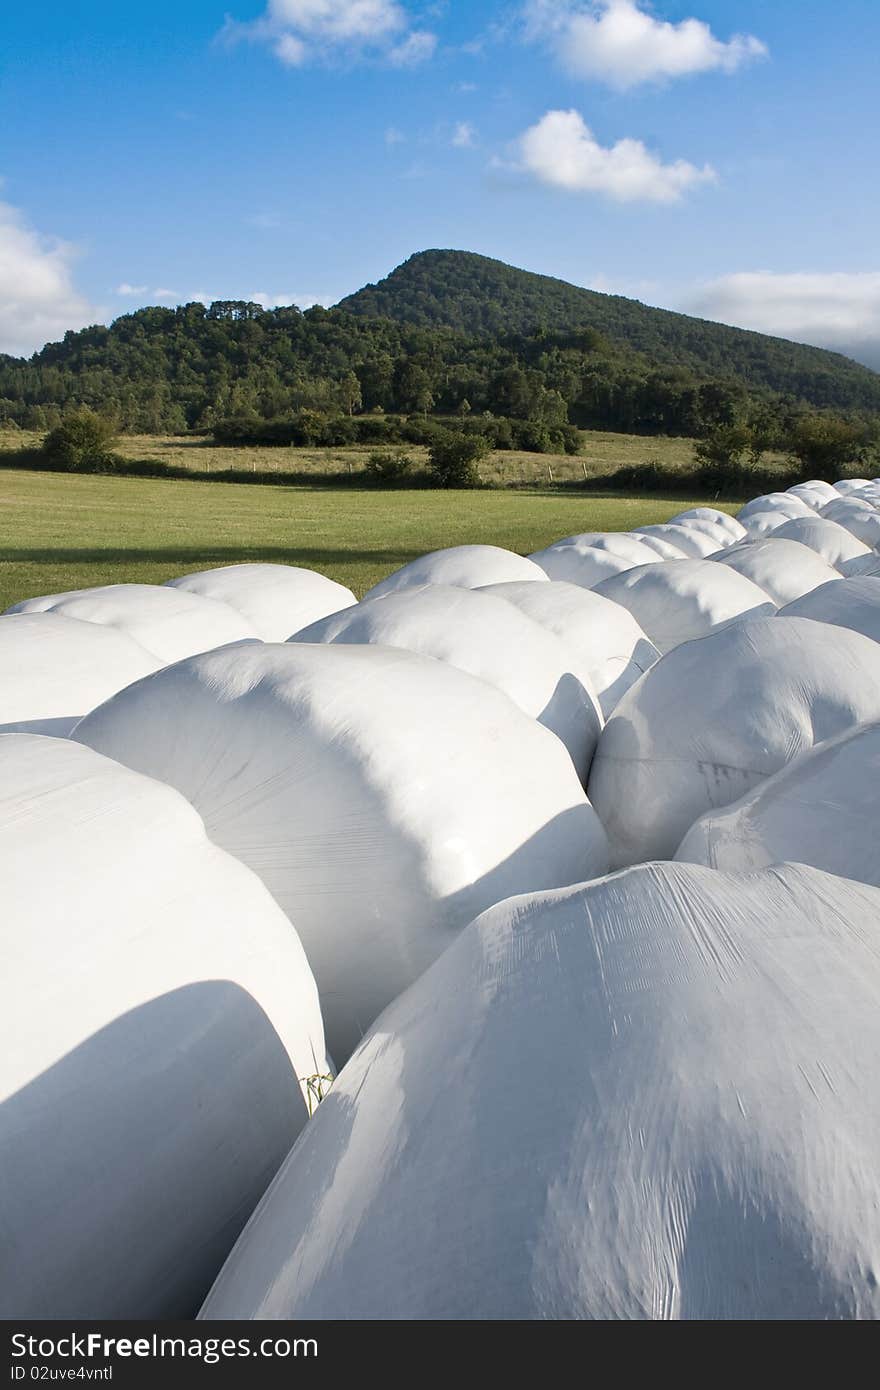 Hay balls in white plastic cover wrap bales stacked outdoor, for feeding animals in farms